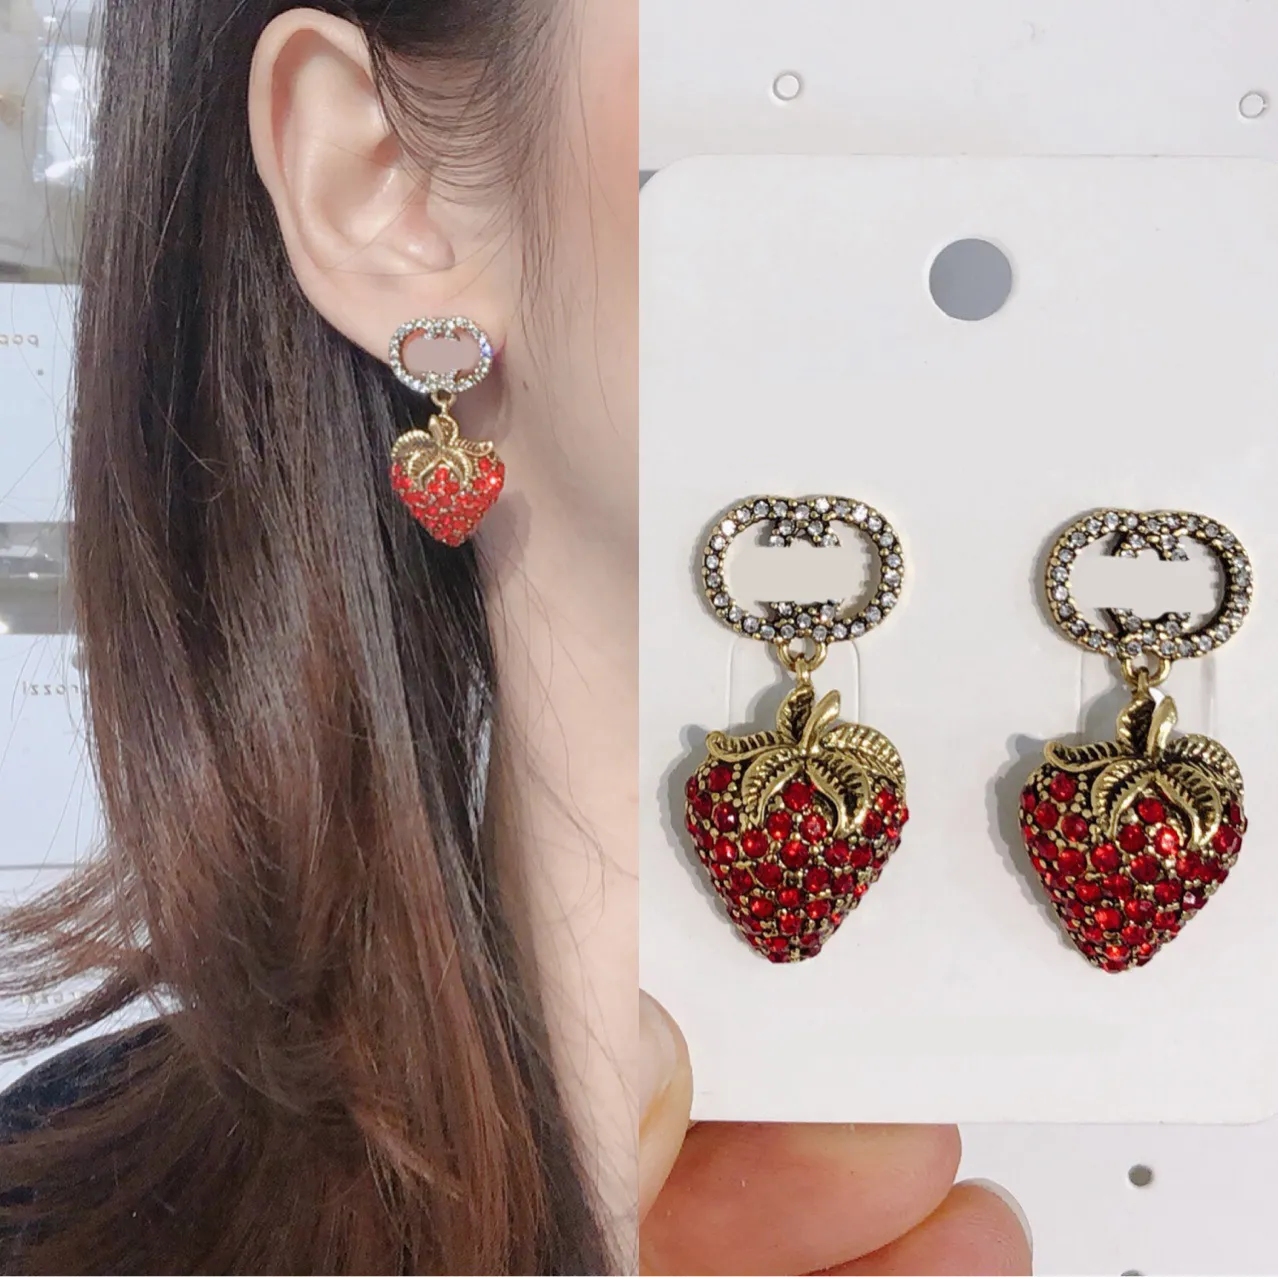 Famous Designer Earring Brand Letter Ear Stud Women Strawberry Pendant Earrings for Wedding Party Gift Jewelry Accessories High Quality 20Style